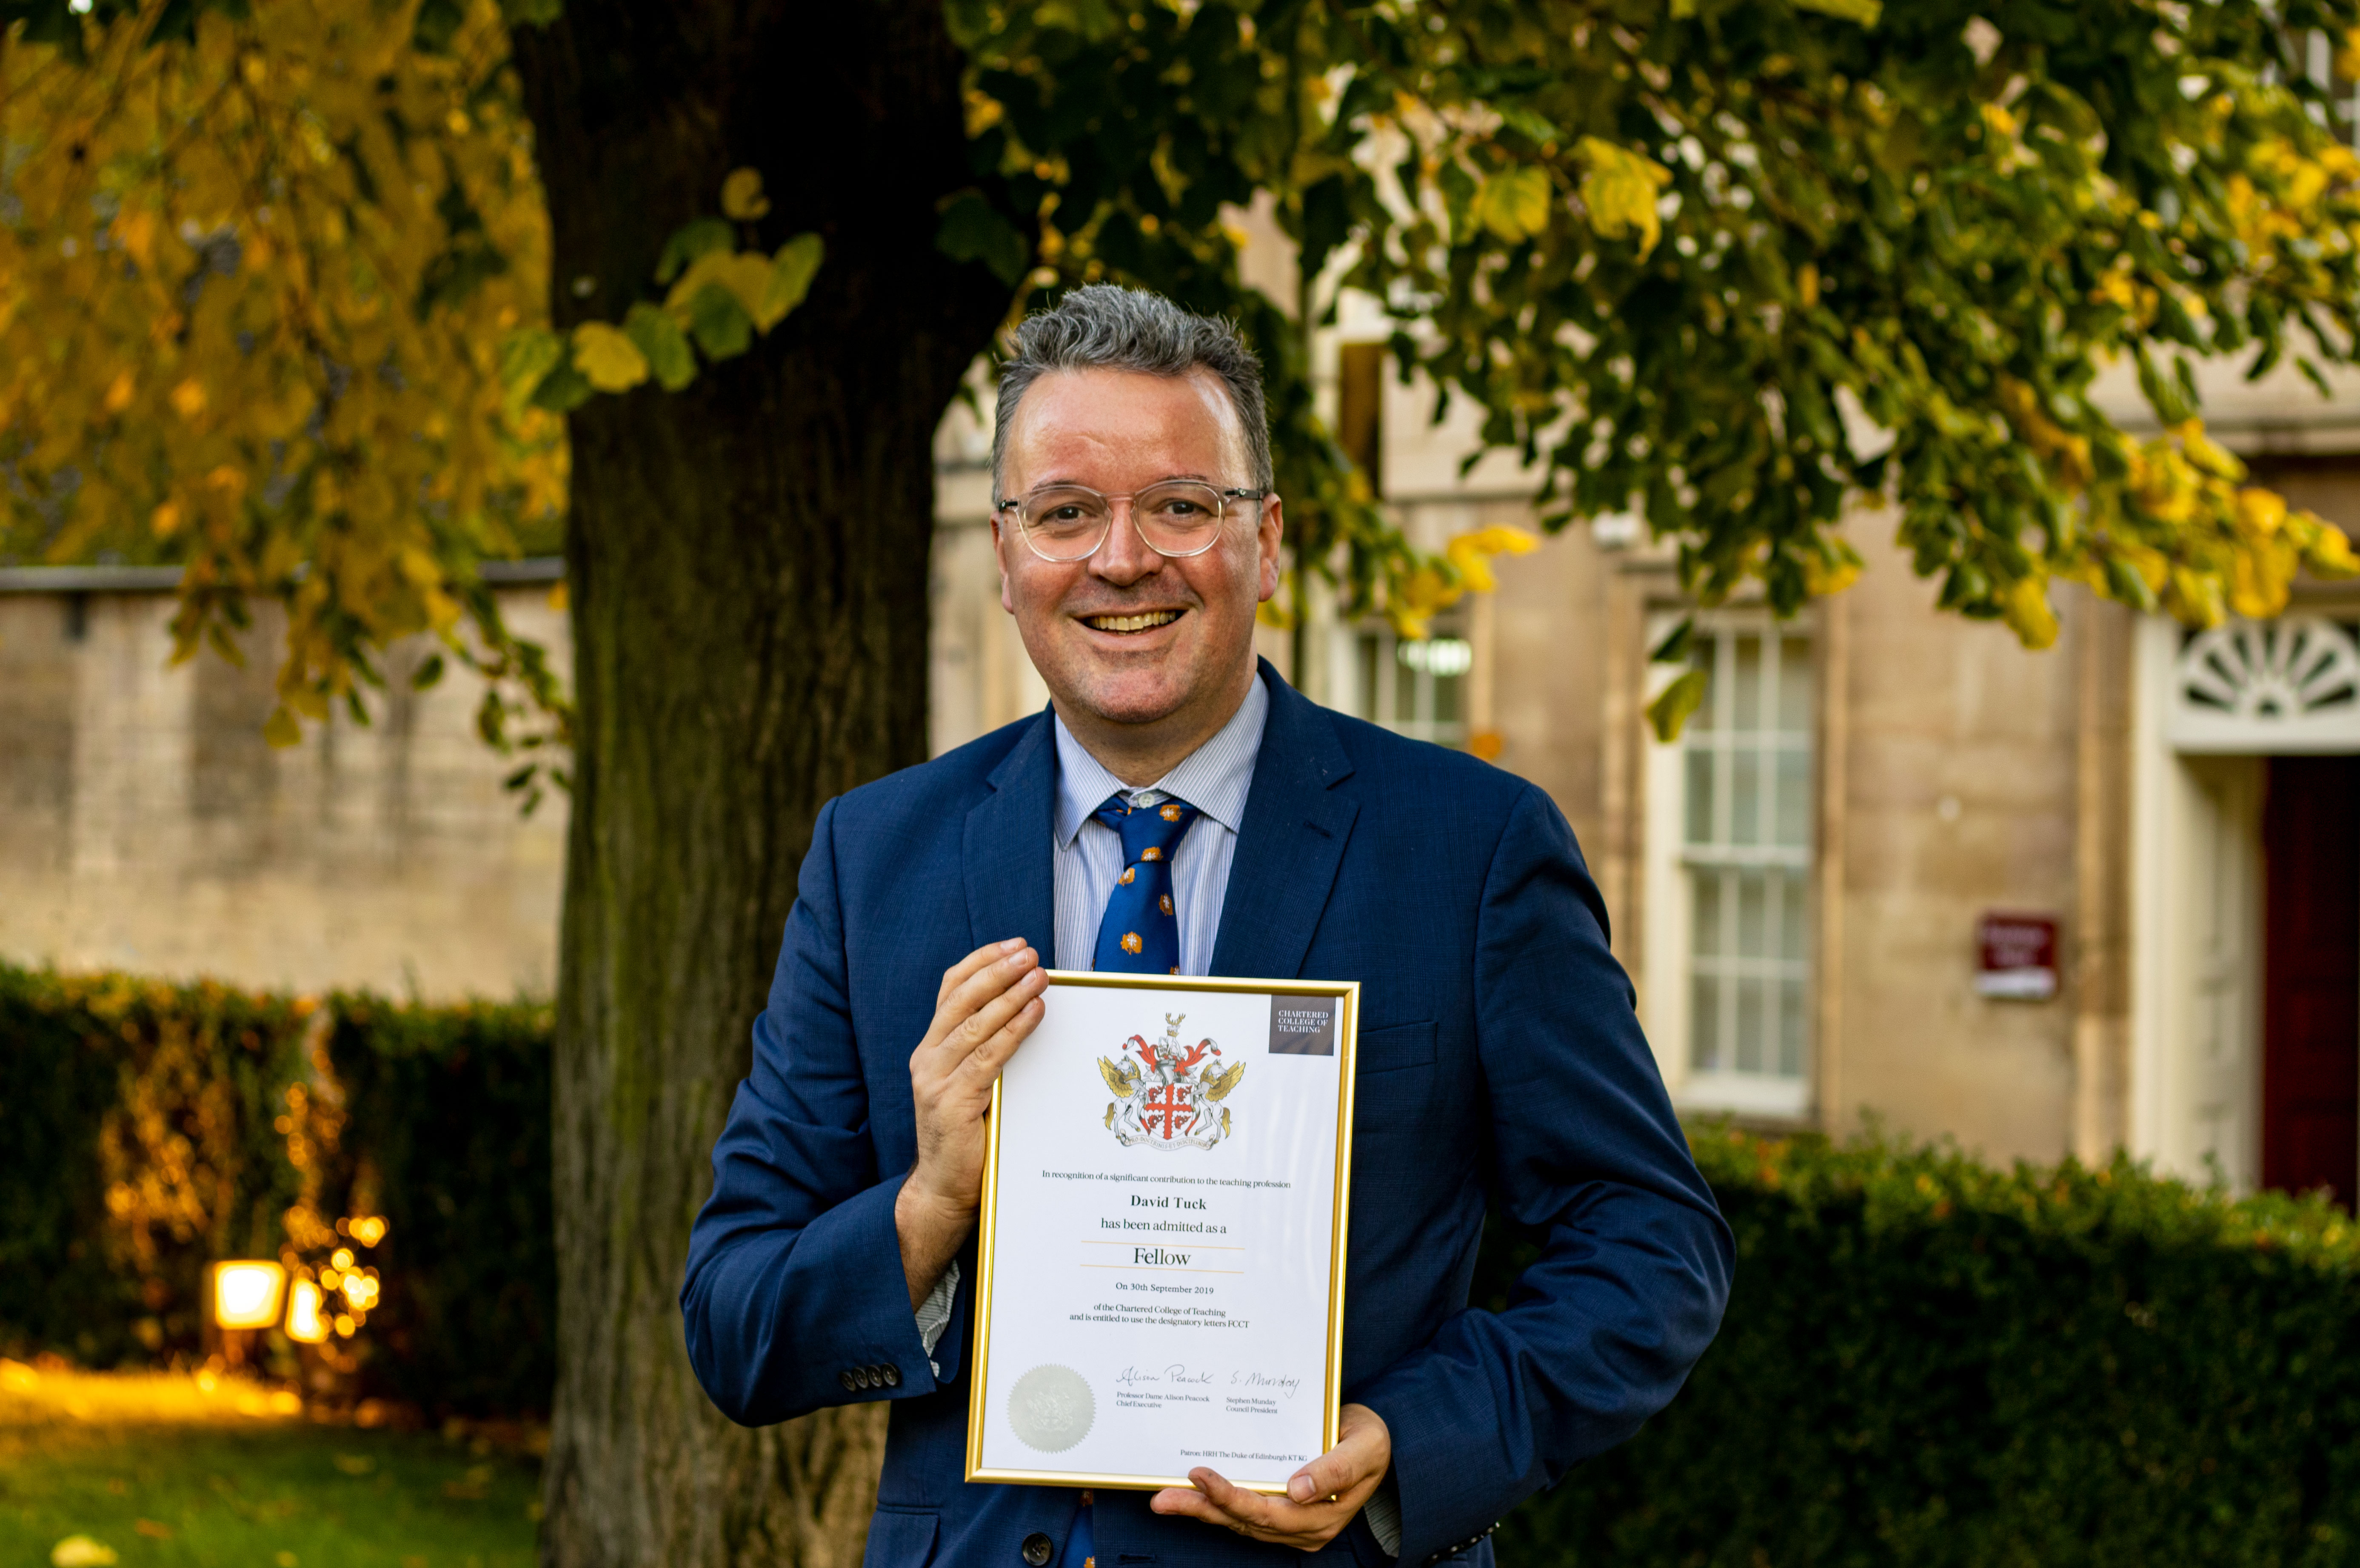 Stamford School teacher awarded fellowship status by Chartered College of Teaching